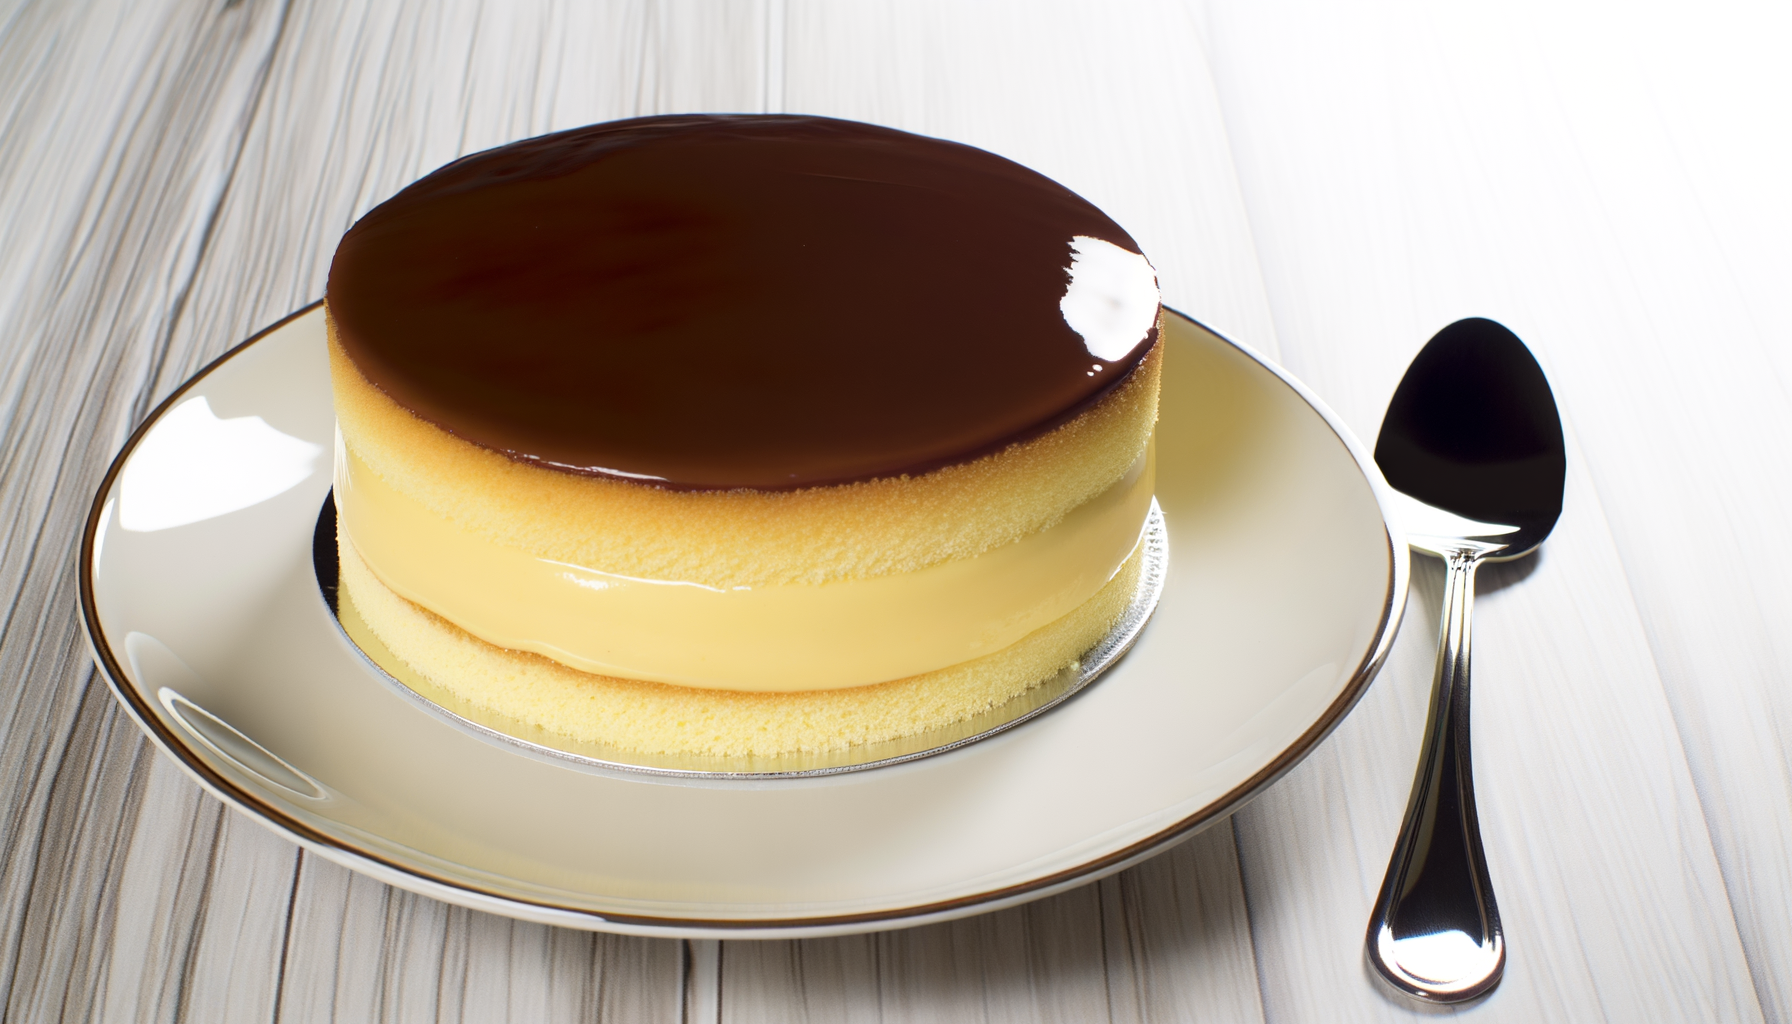 Elegant Boston Cream Pie with vanilla custard sandwiched between golden sponge cake layers, topped with smooth chocolate ganache, on a white plate beside a silver fork.